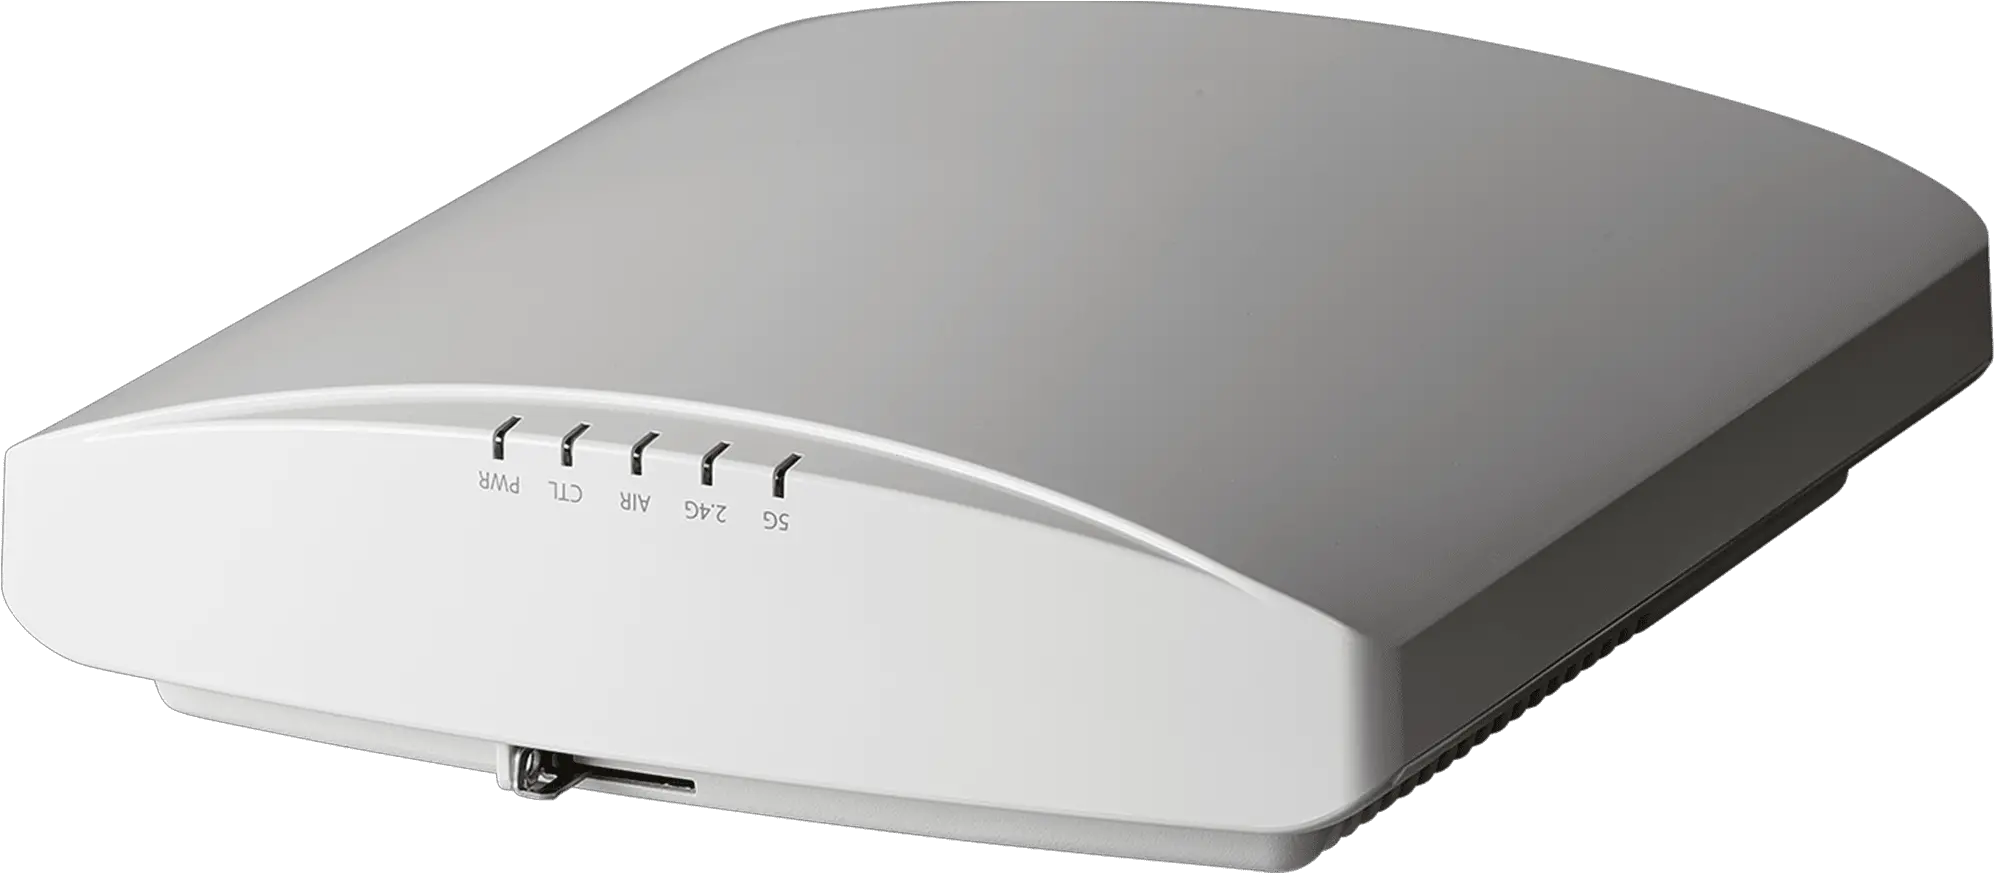 Download More A Thin Arrow Pointing To The Right R730 Ruckus Wifi Access Point Png Thin Arrow Png